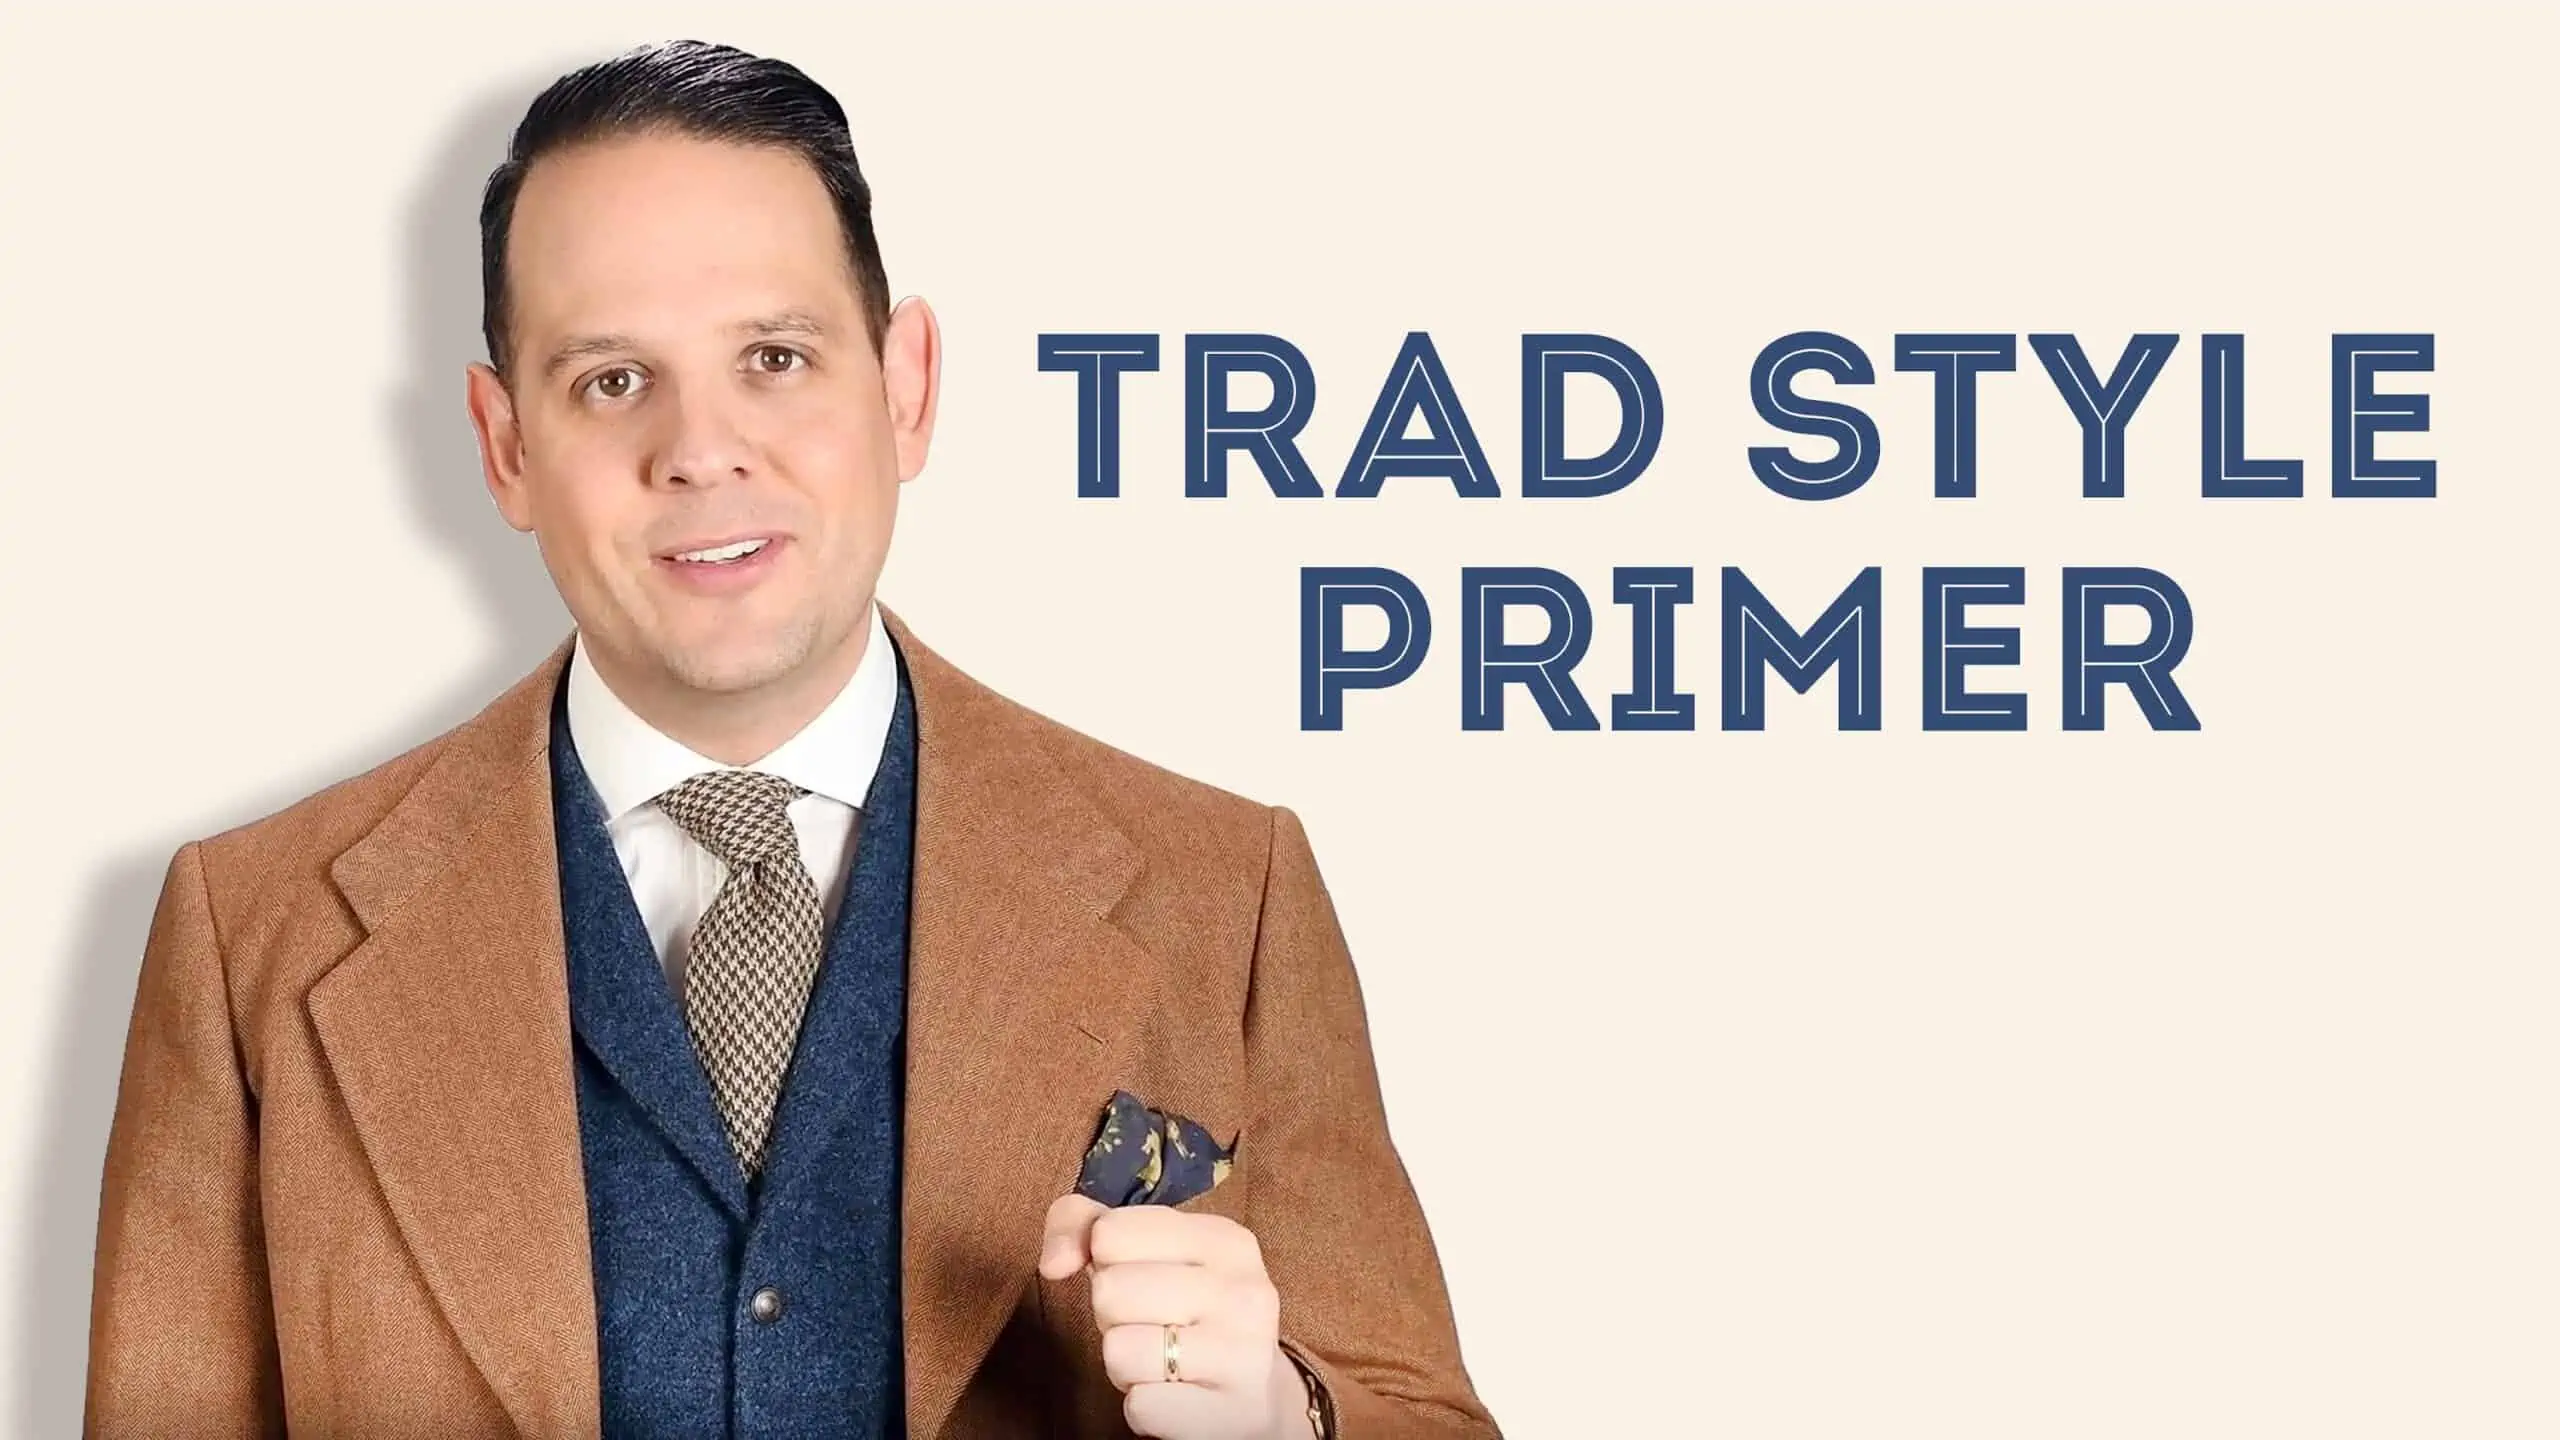 trad style primer scaled